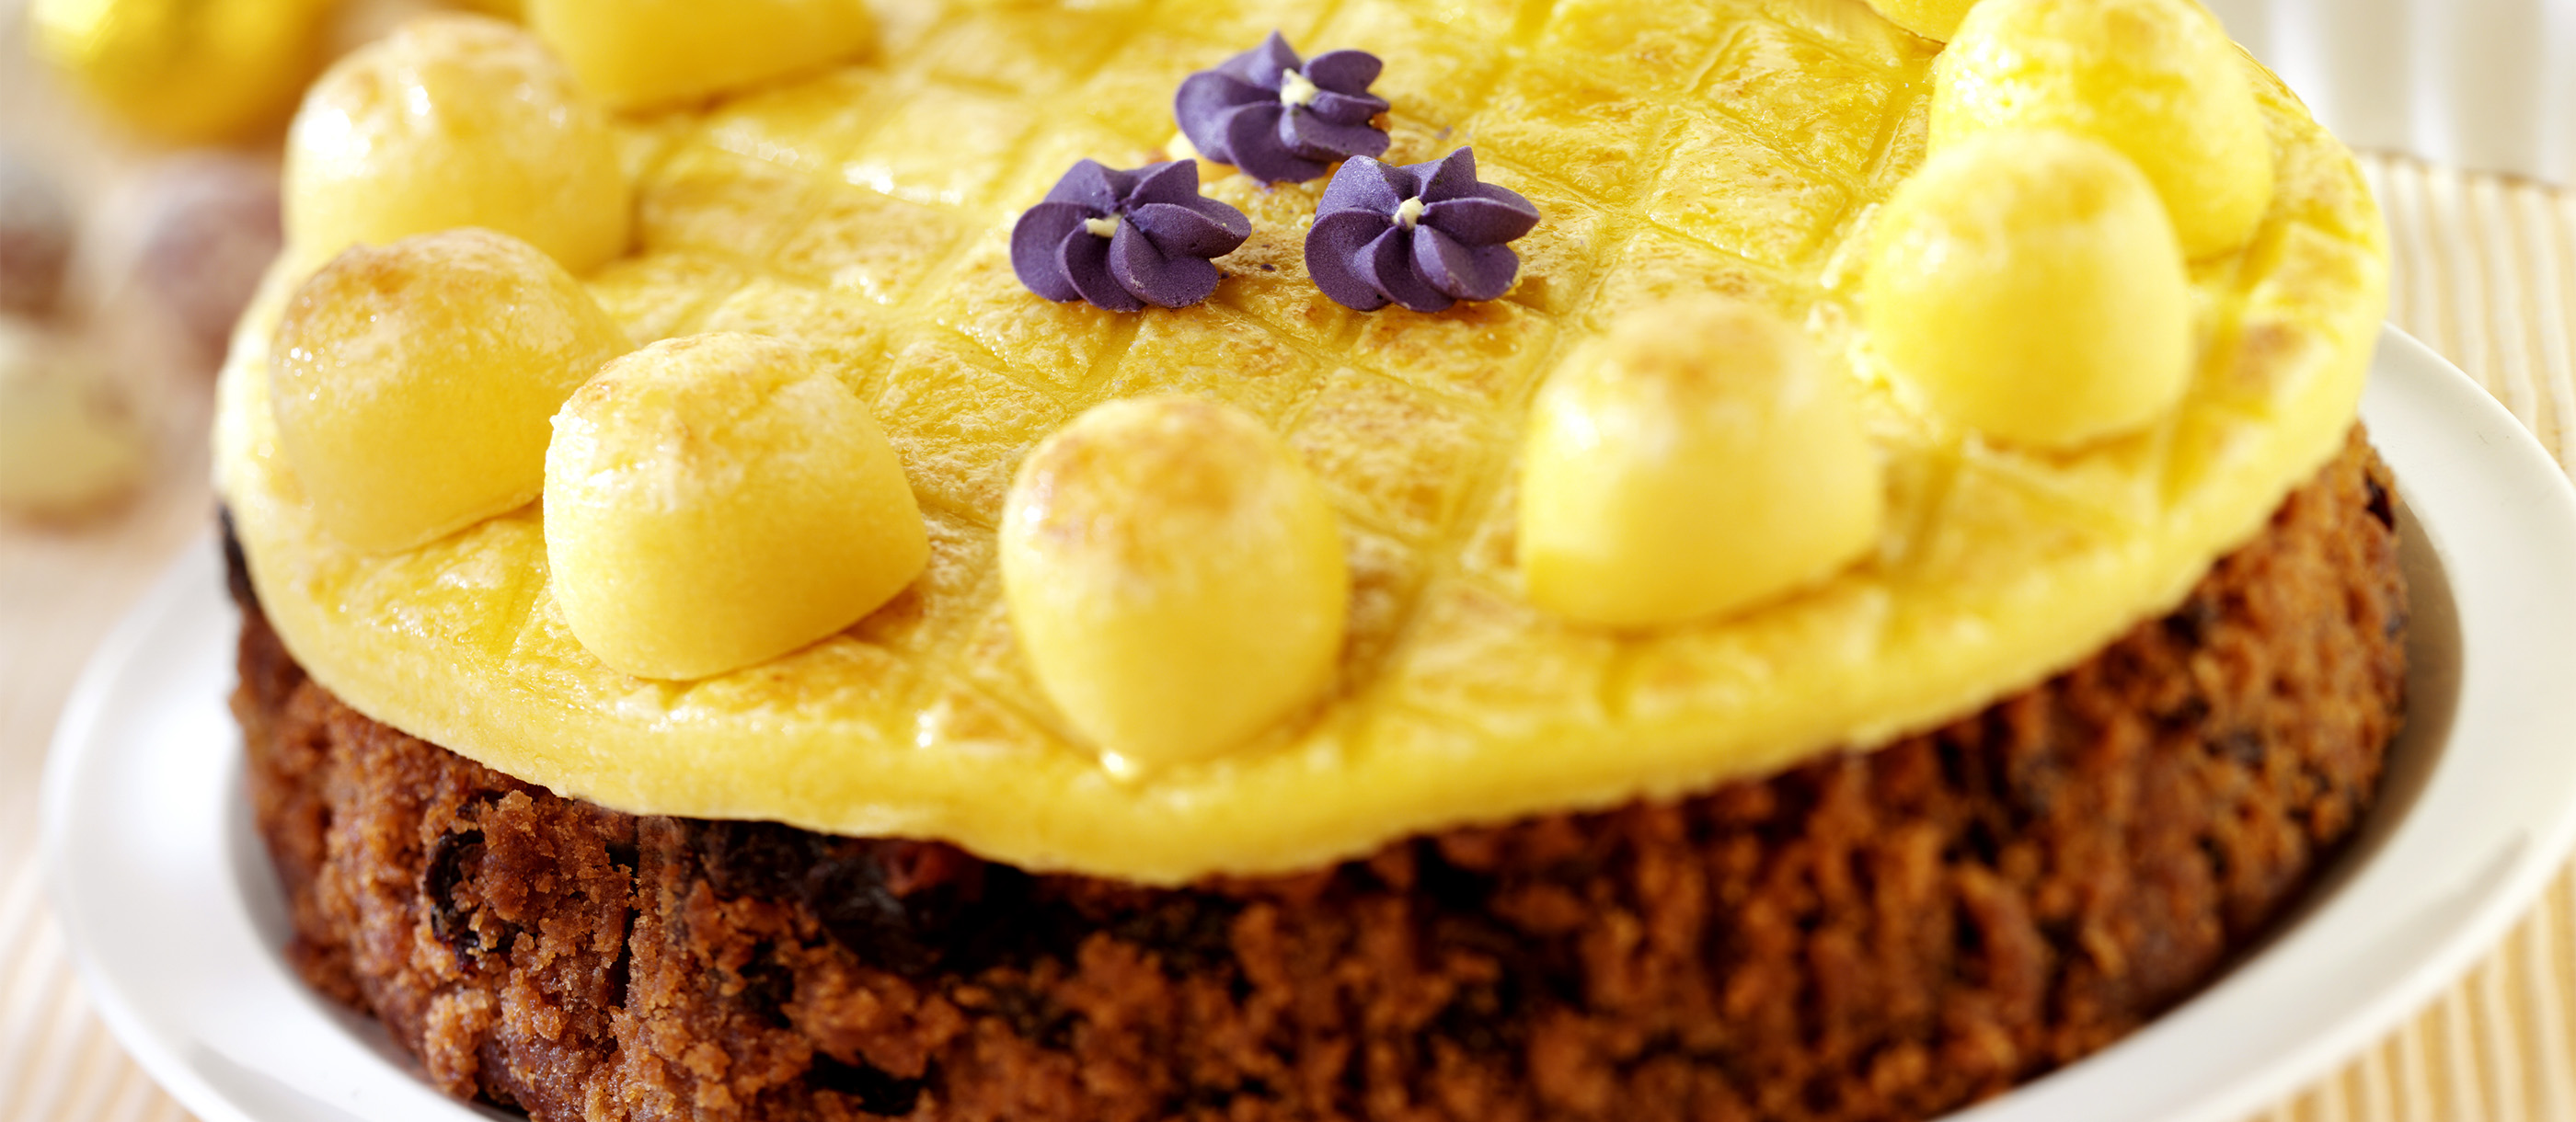 Simnel Cake: The Sweet Treat Eaten In The UK To Celebrate Easter